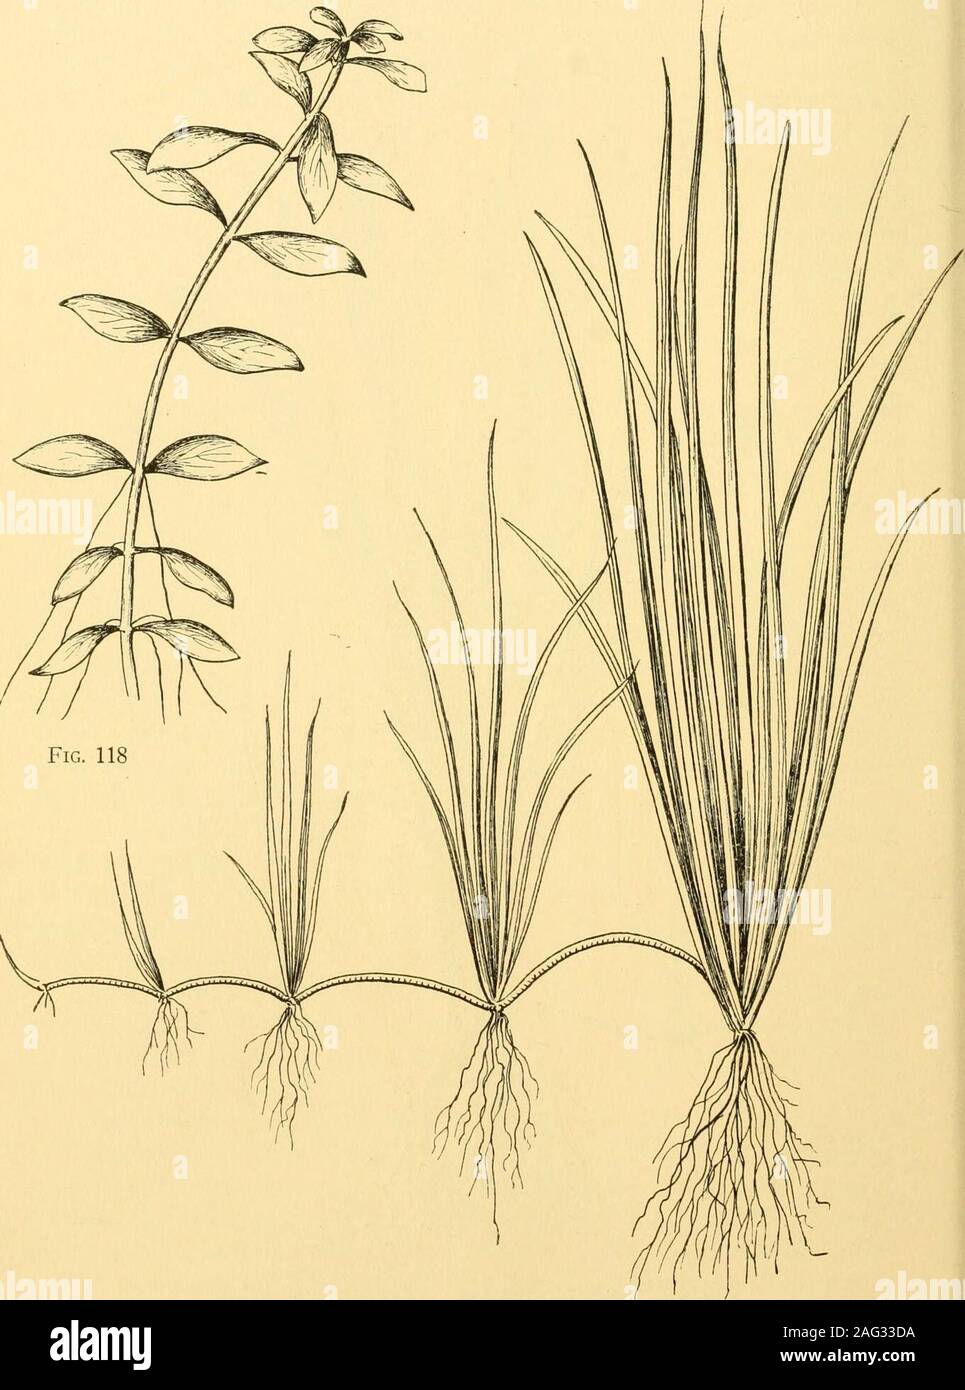 . Goldfish varieties and tropical aquarium fishes; a complete guide to aquaria and related subjects. Fig. 116. Giant Sagittaria (Reduced one-half) 168 GOLDFISH VARIETIES AND. Fig. 117. Sagittaria subulata [Piisilla] (h^atural sice)Fig. 118. Wild Ludwigia (L. glandiilosa) TROriCAL AQUAIULM FISHES 169 Stock Photo